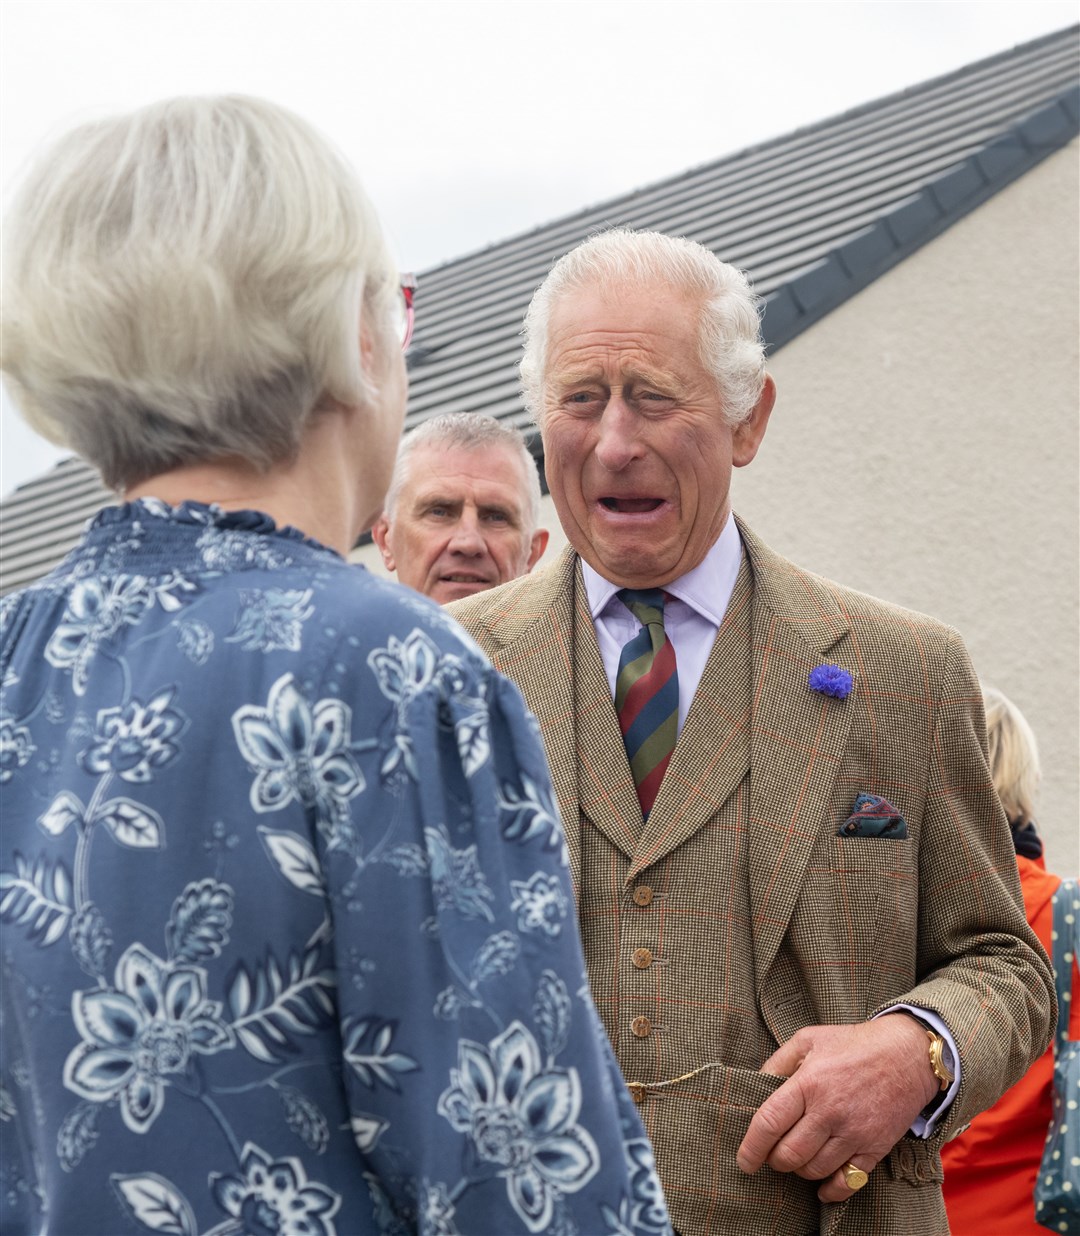 King Charles III shares a laugh during his visit to Tomintoul. Picture: Beth Taylor.